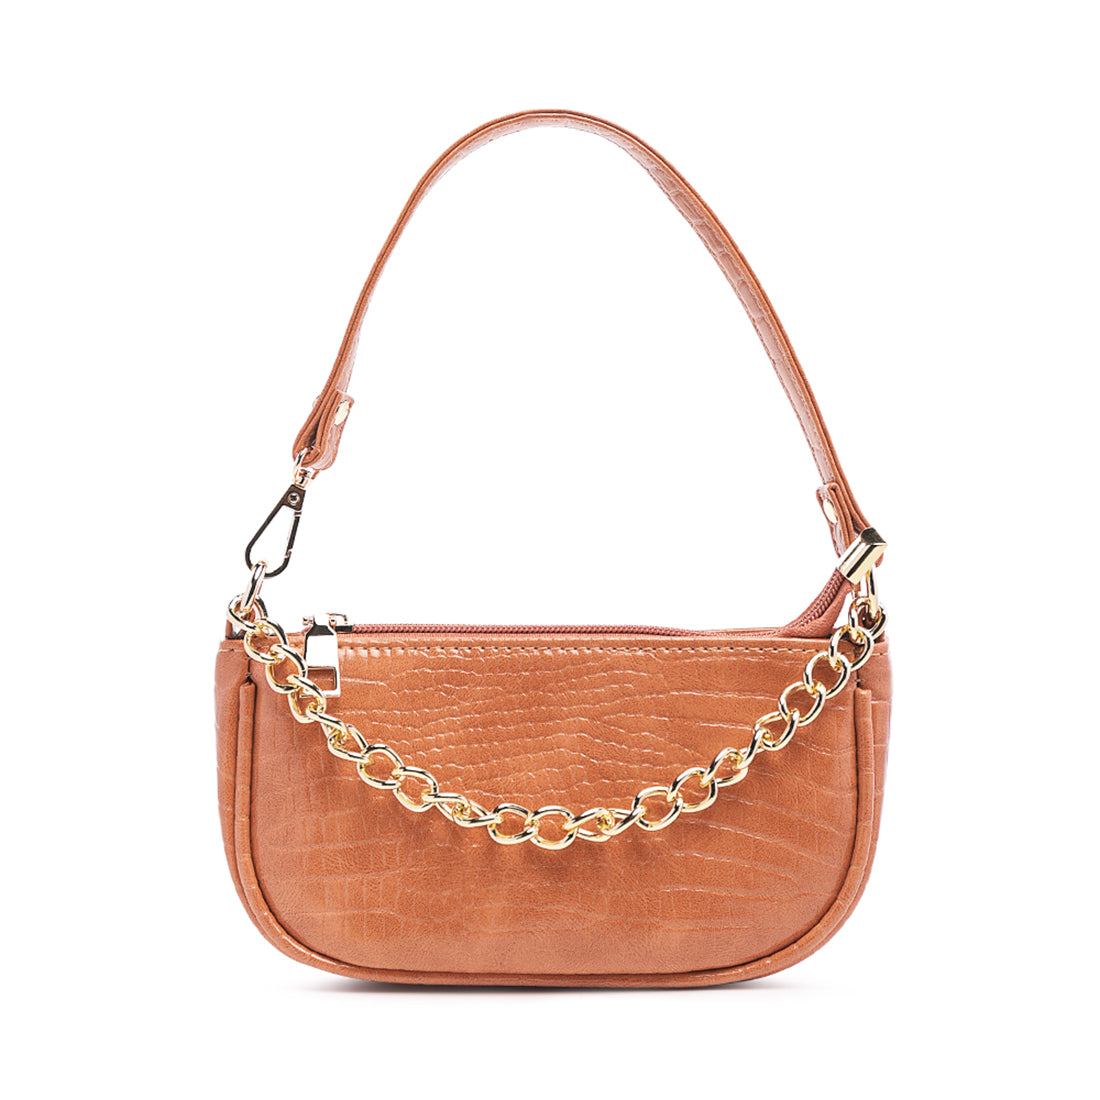 Croc Sling Bag in Coral - One Size